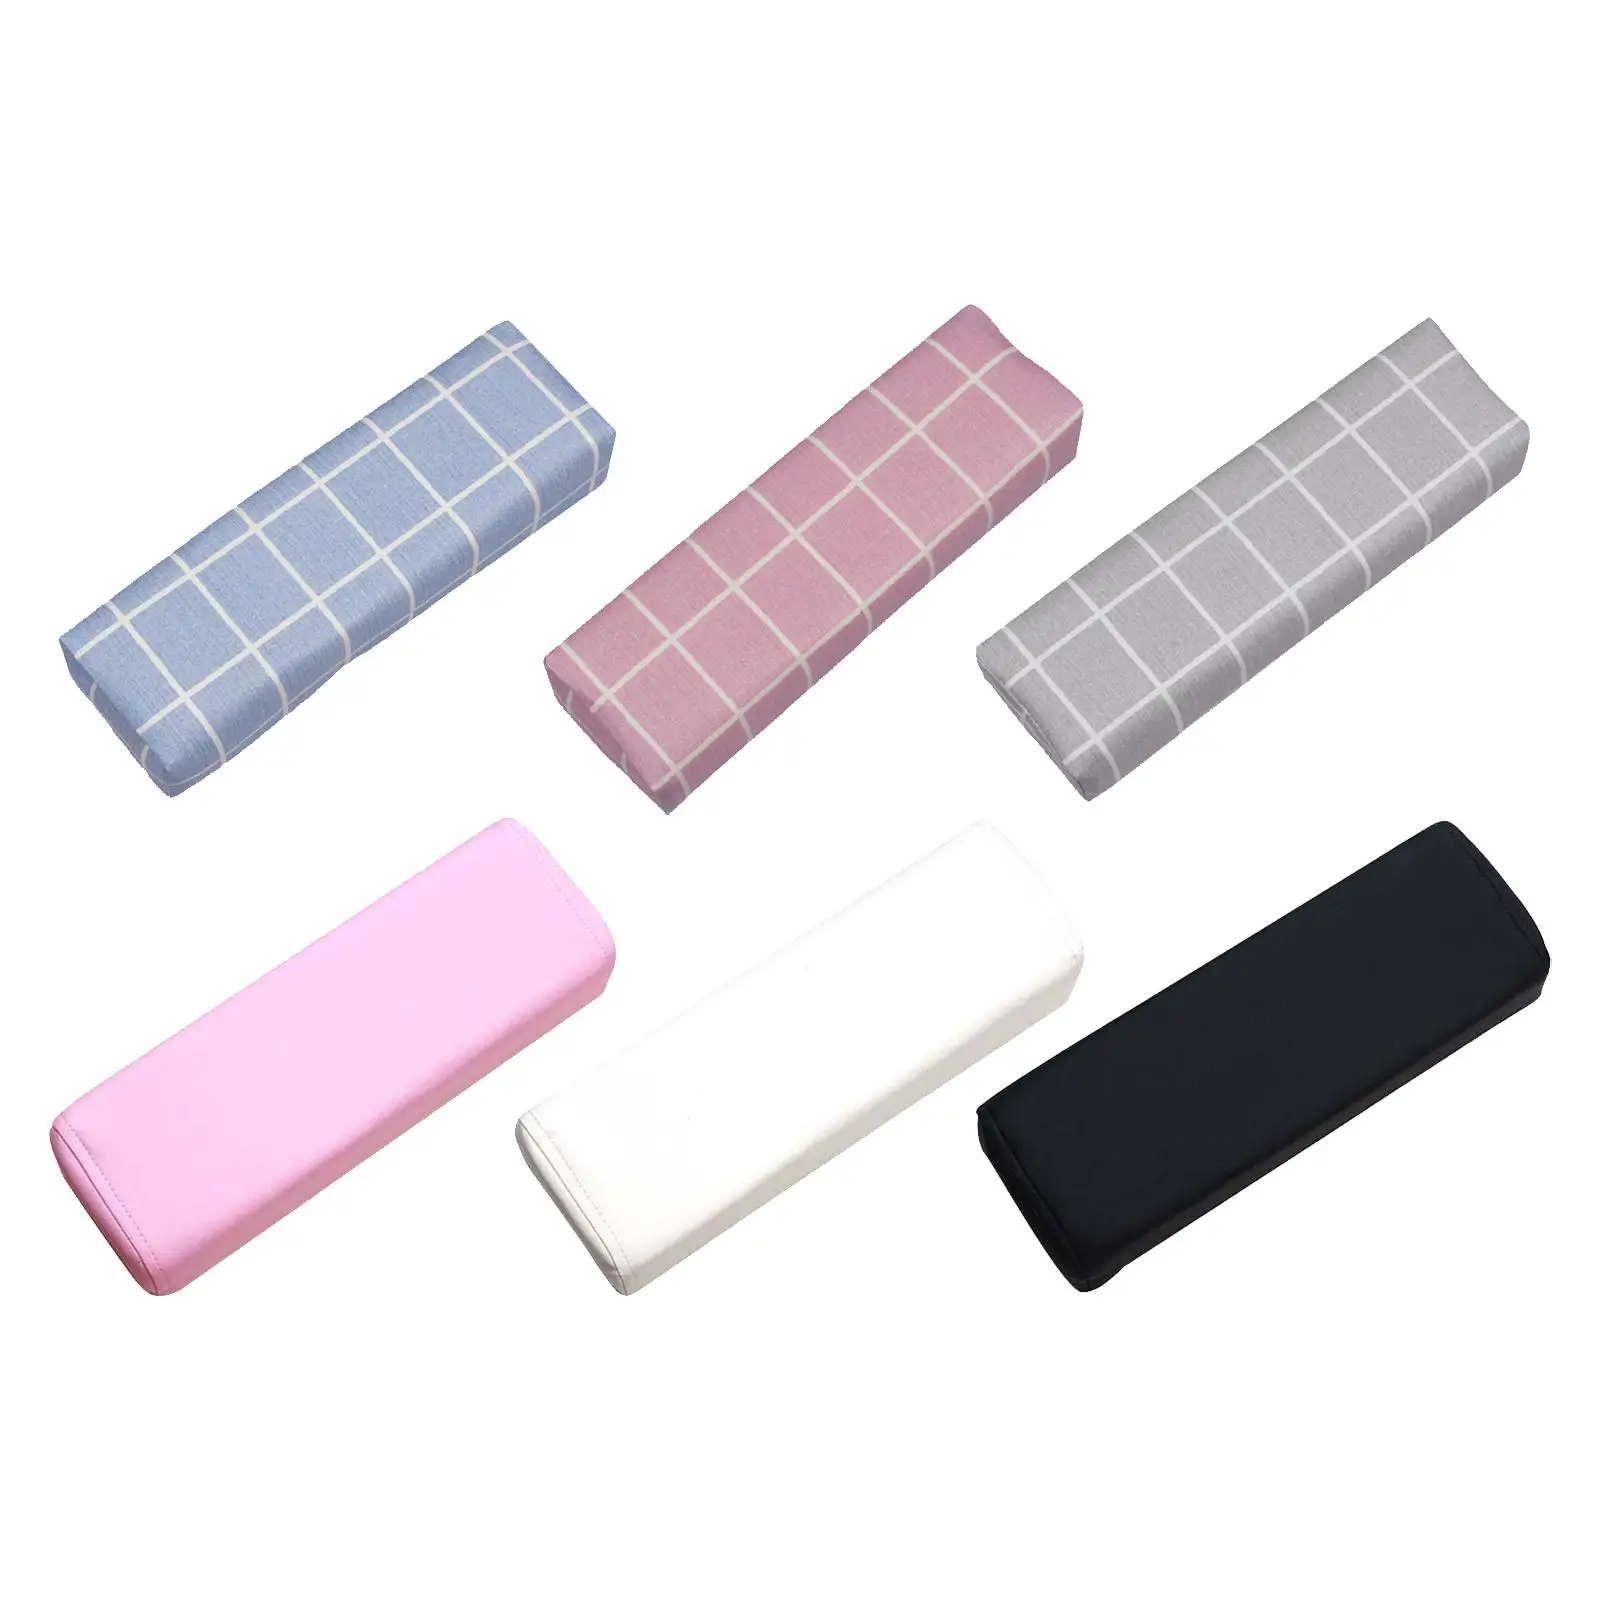 Nail Pillow PU Leather Washable Sweatproof Detachable Soft Nail Art Table Mat Hand Cushion for Nail Table Manicure Beauty Salon